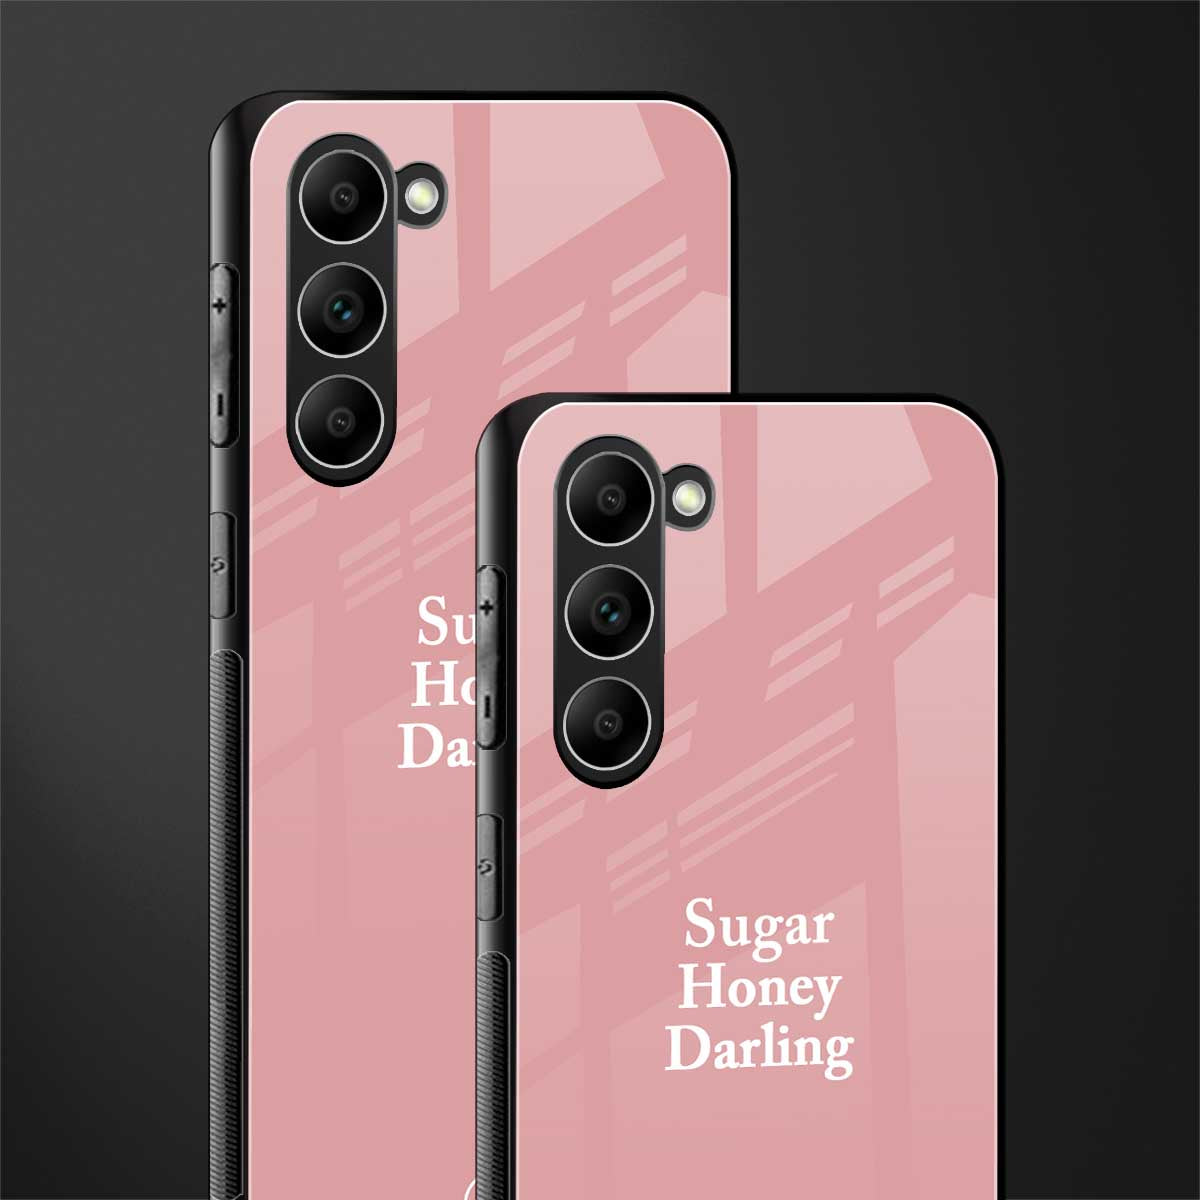 Suger-Honey-Darling-Glass-Case for phone case | glass case for samsung galaxy s23 plus